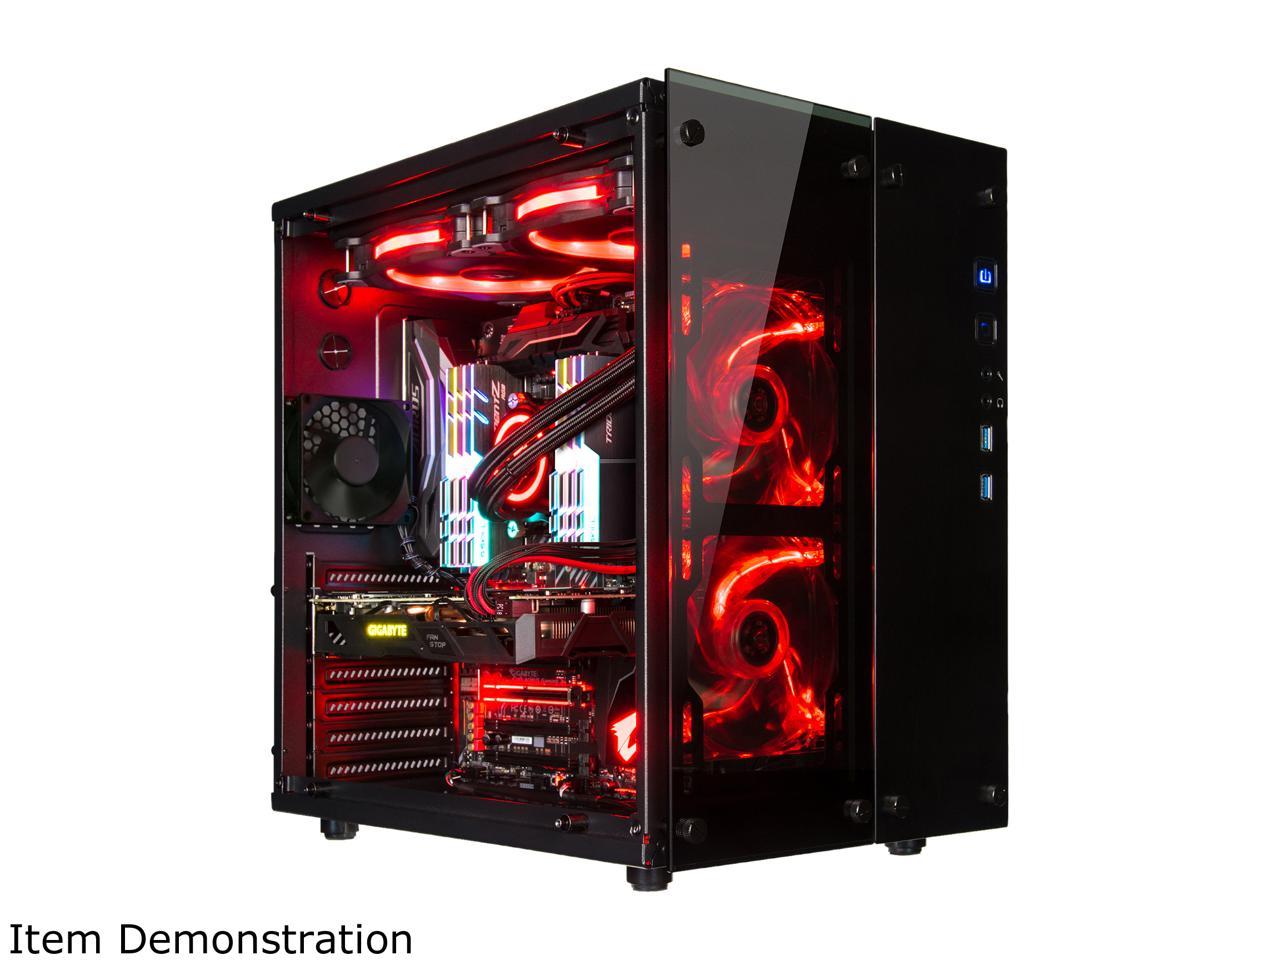 Rosewill Cube Mini ITX/Micro-ATX/ATX Mid Tower Gaming PC Computer Case, Black Steel Tempered Glass, Red LED Fans - Cullinan PX Red